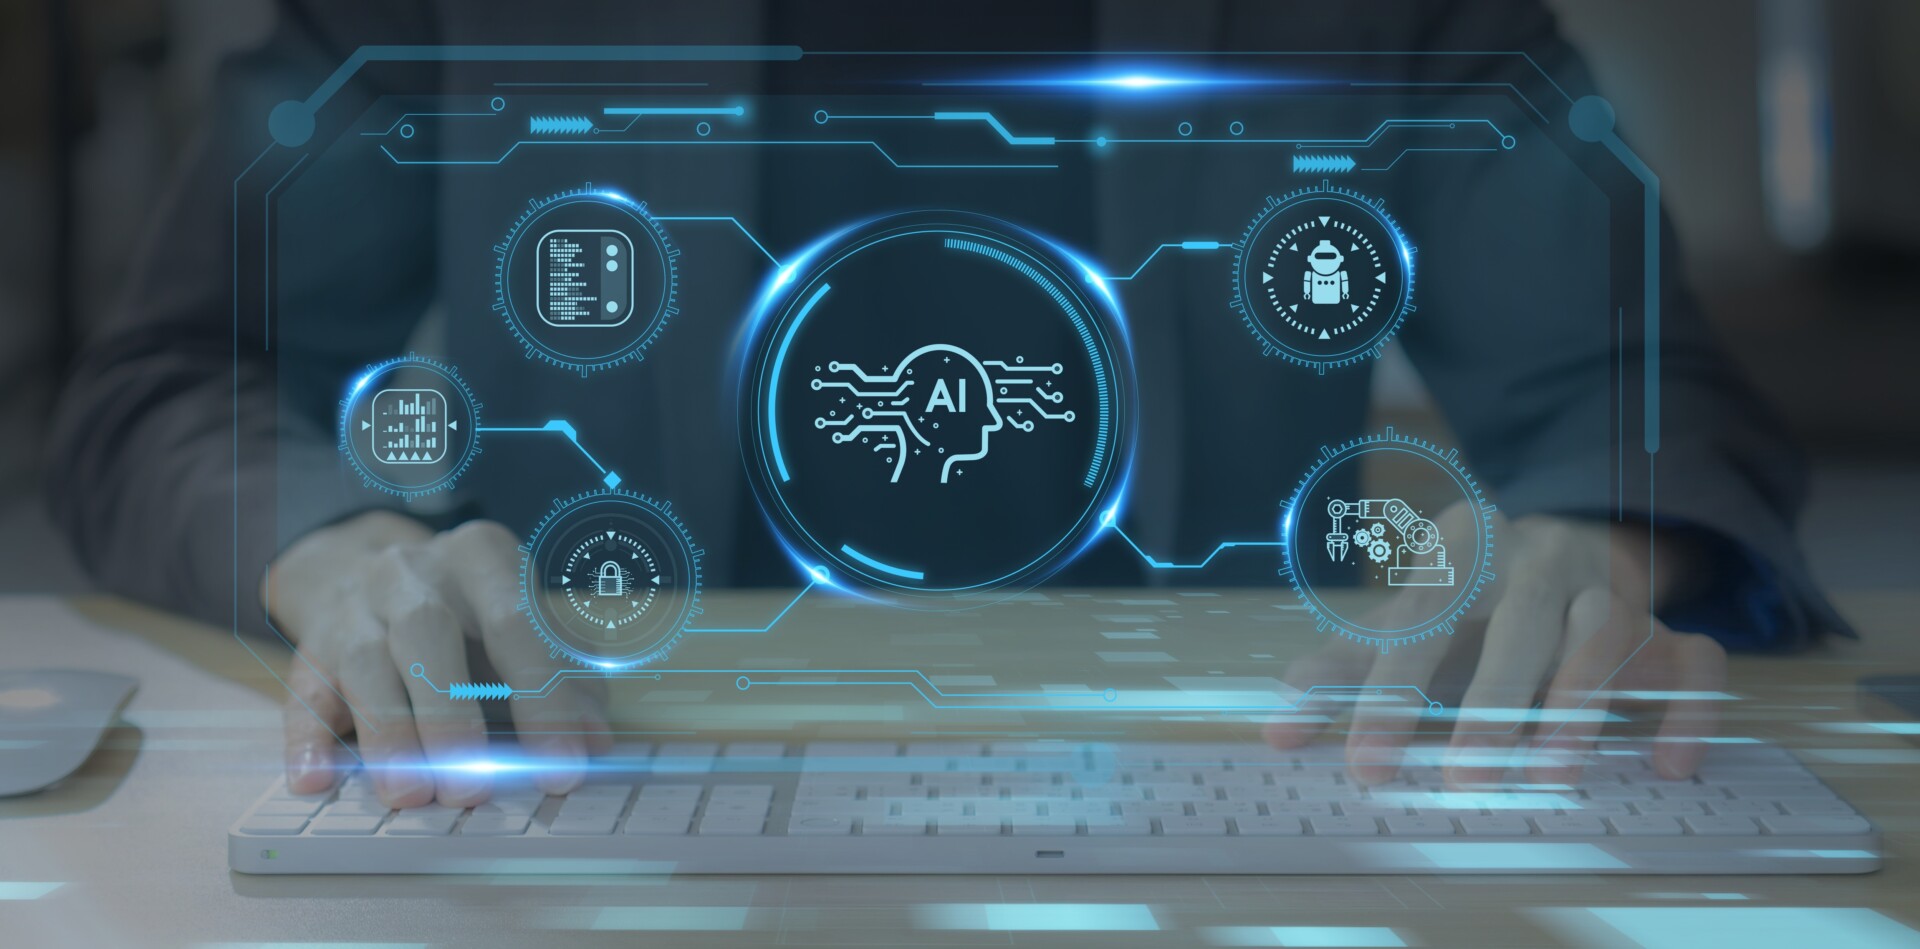 Two hands are pictured on a keyboard as floating text and images in the foreground symbolize AI-Artificial intelligence innovation, AI adoption and operational support.